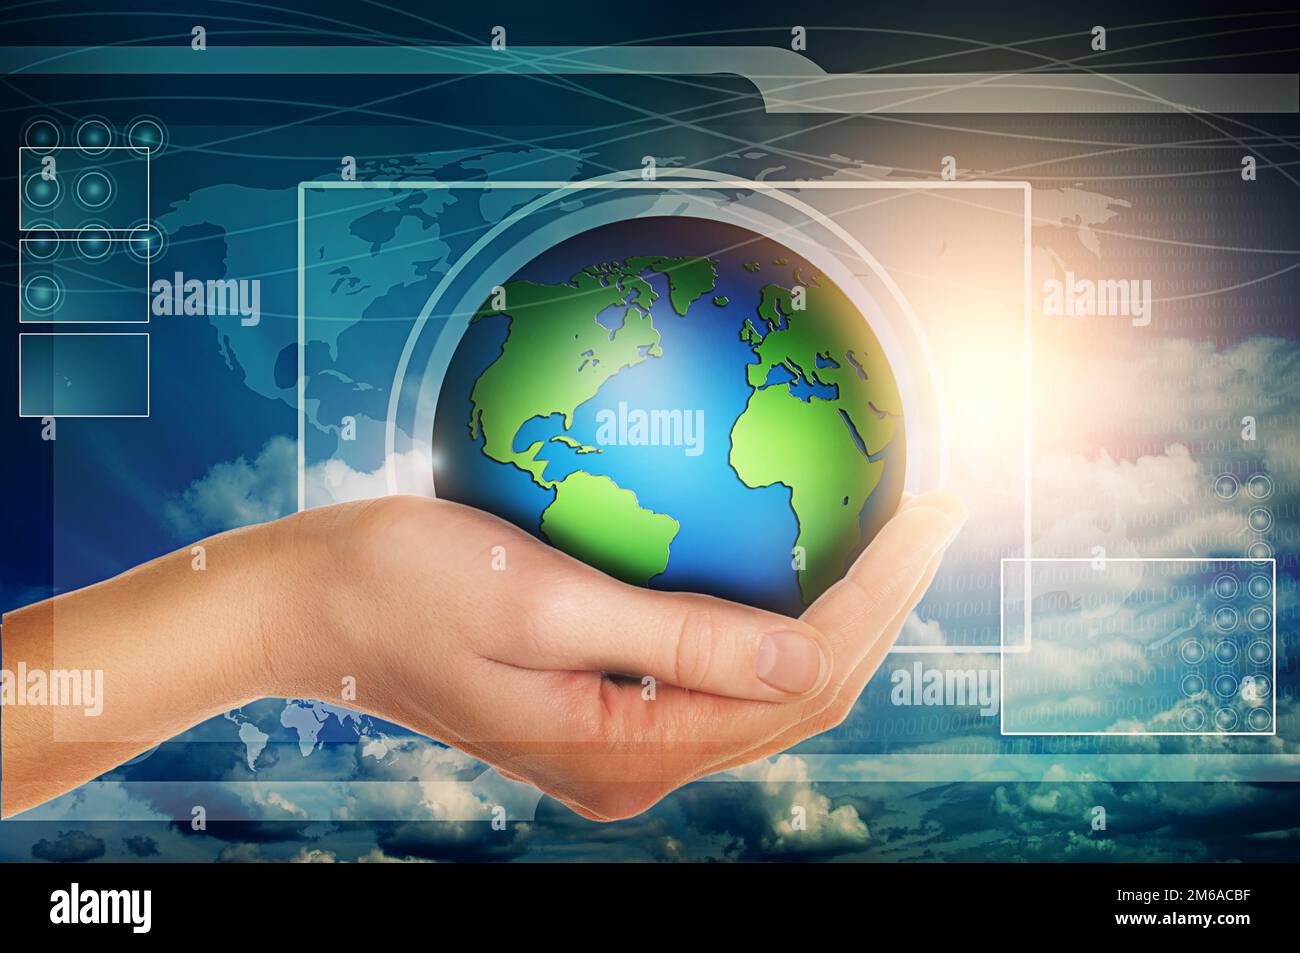 Hand holding globe in blue virtual interface Stock Photo